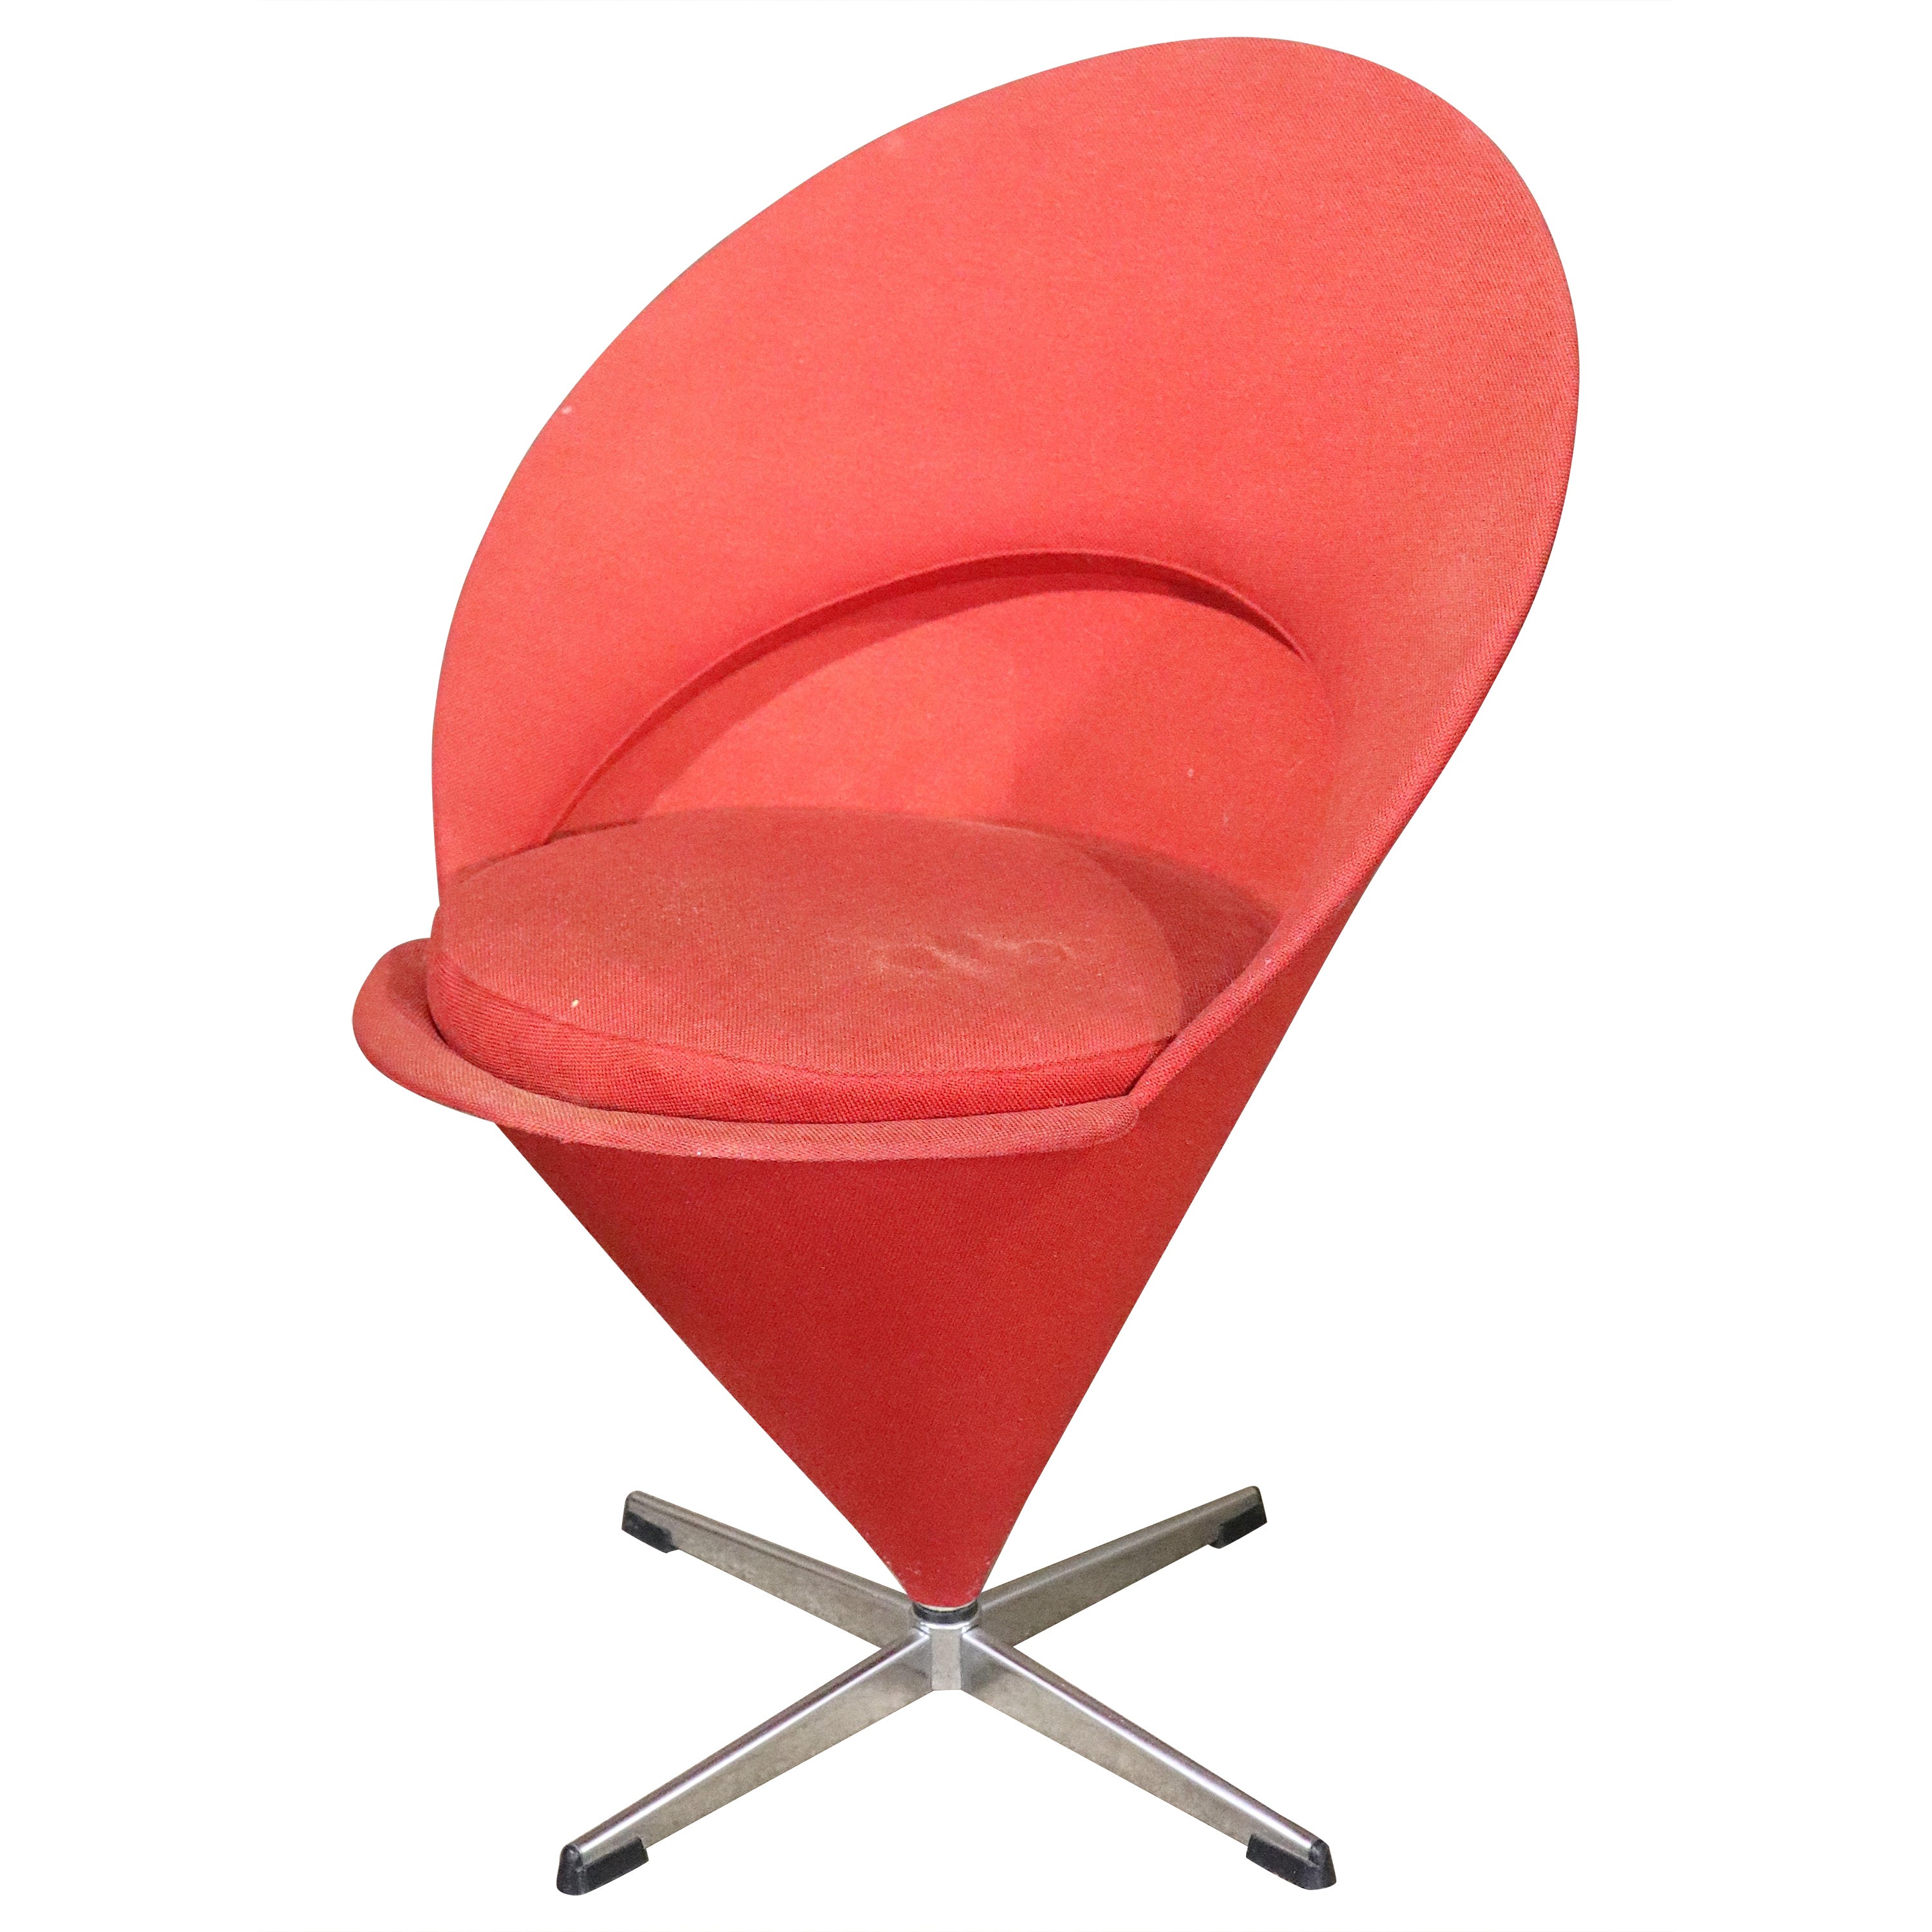 Verner Panton "Cone" Chair For Sale